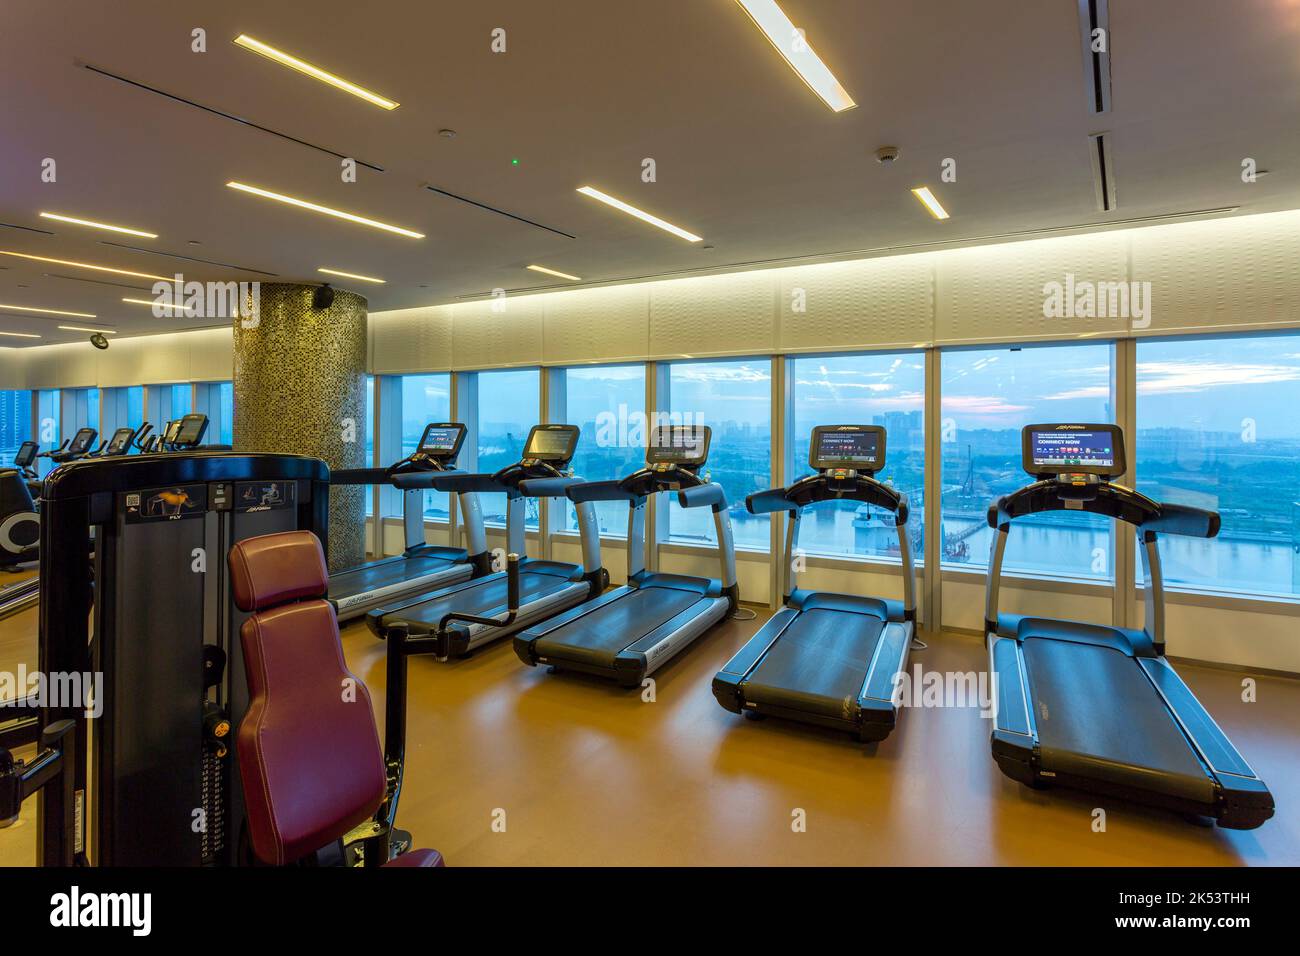 Hanoi, Vietnam - January 22, 2018: Interior view of the fitness center and gym exercise equipment at Le Meridien in Hanoi, Vietnam. Stock Photo